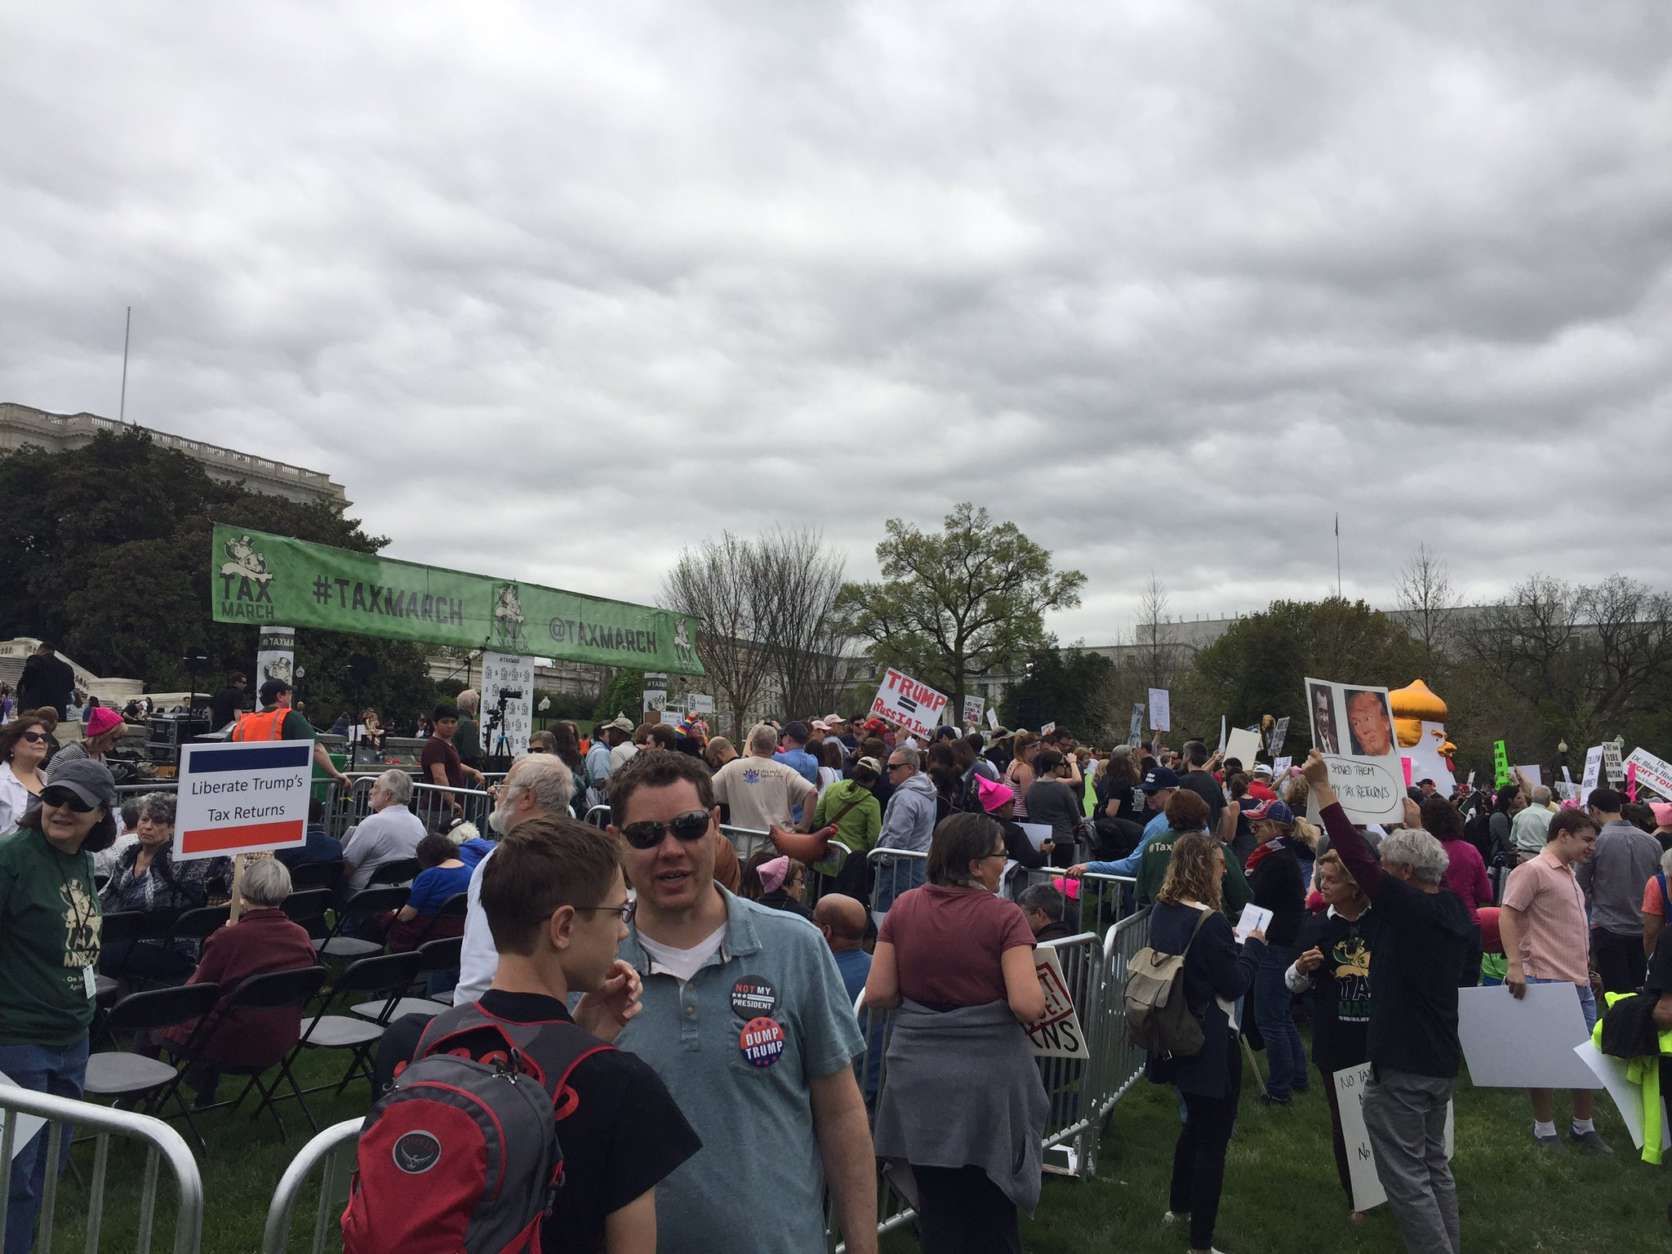 Thousands gathered on west lawn of the Capitol for  the Tax Day march. (WTOP/John Domen)